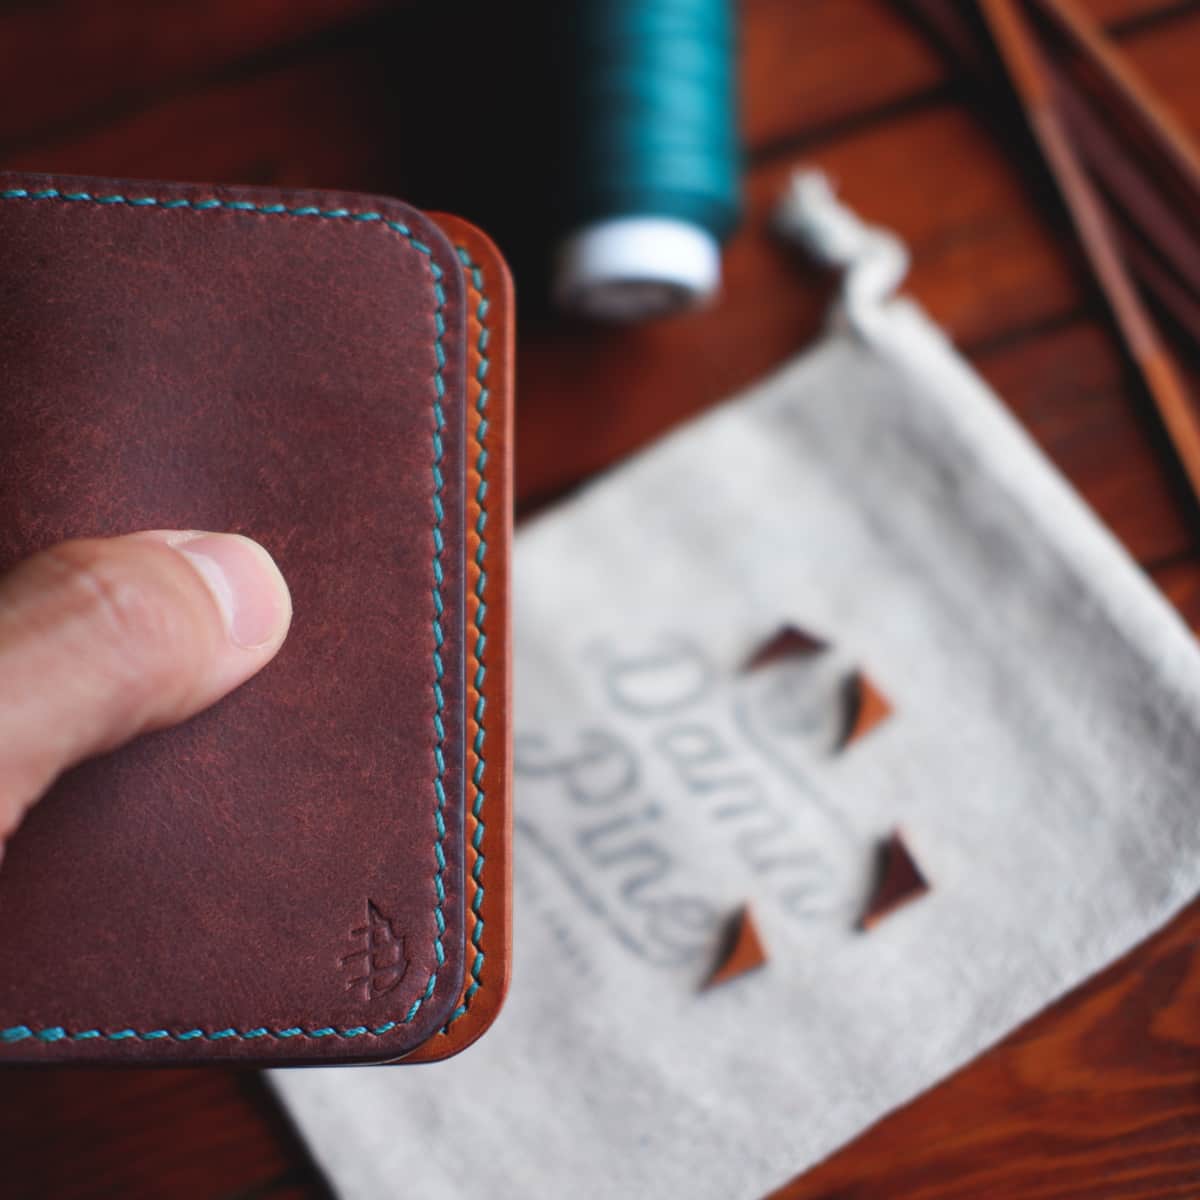 The Monterey Slim Bifold in Graffiti vegetable tanned leather held in hand